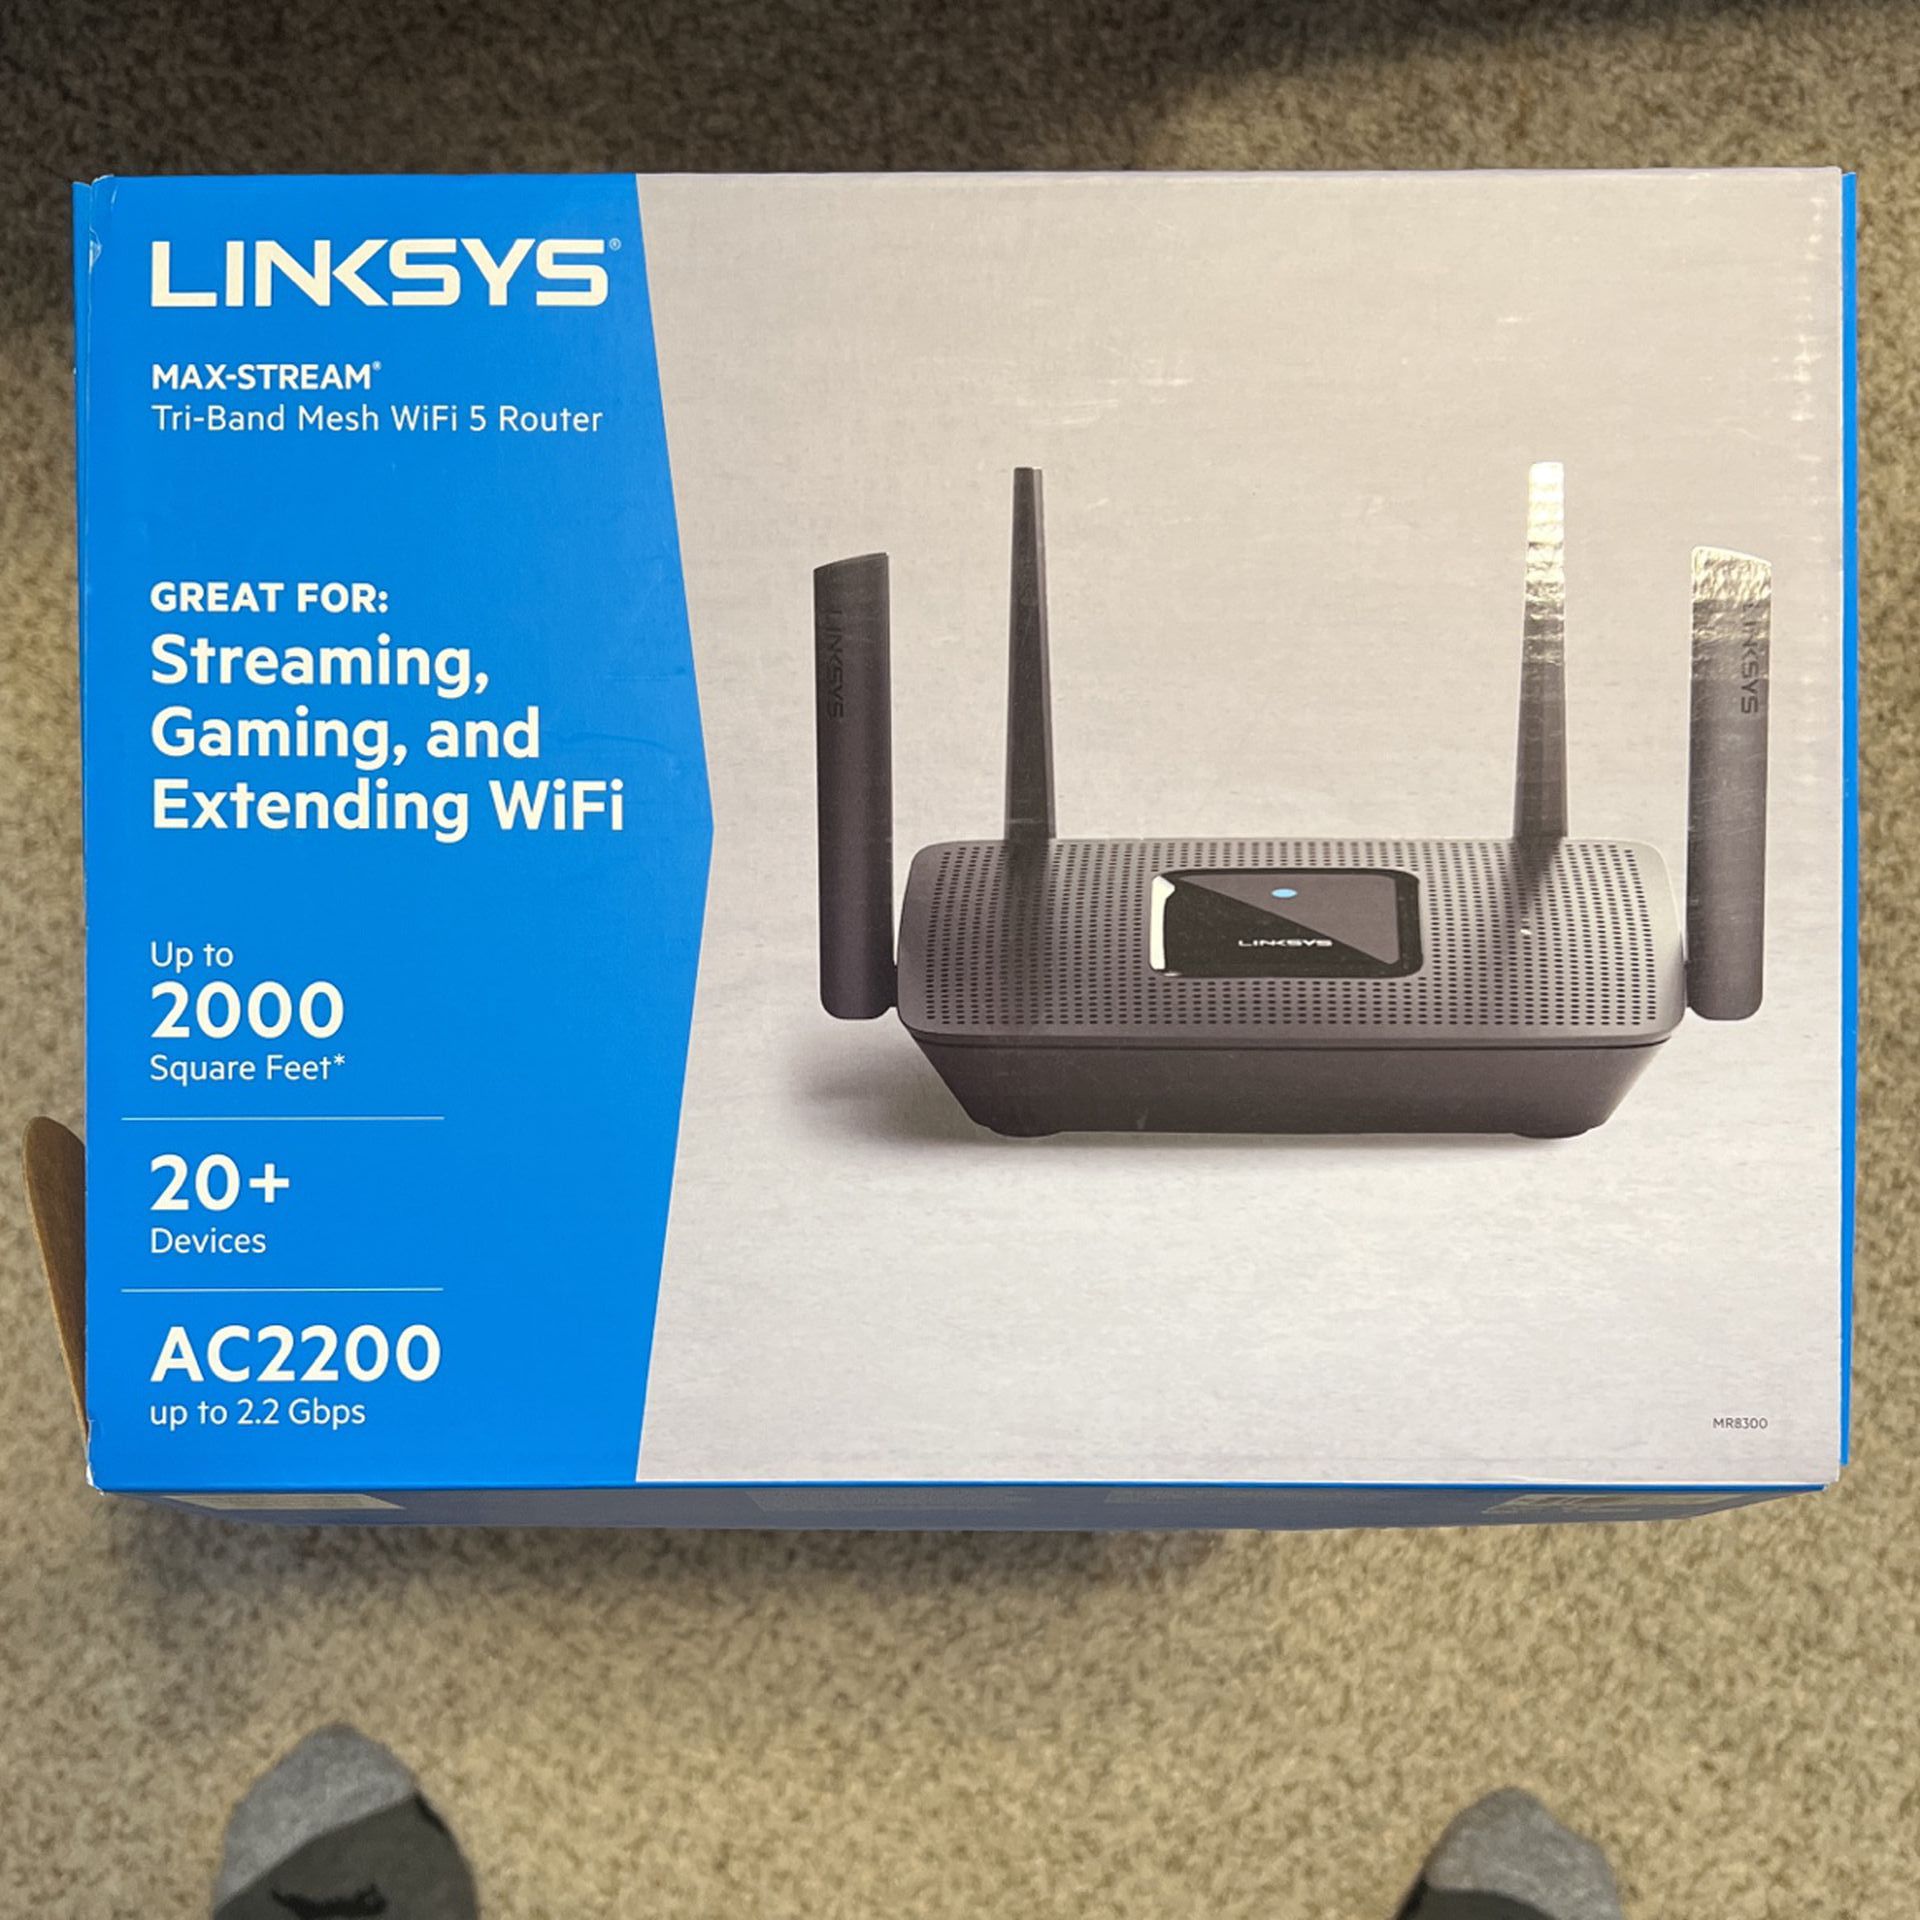 Linksys Max-Stream Tri-Band Mesh WiFi 5 Router